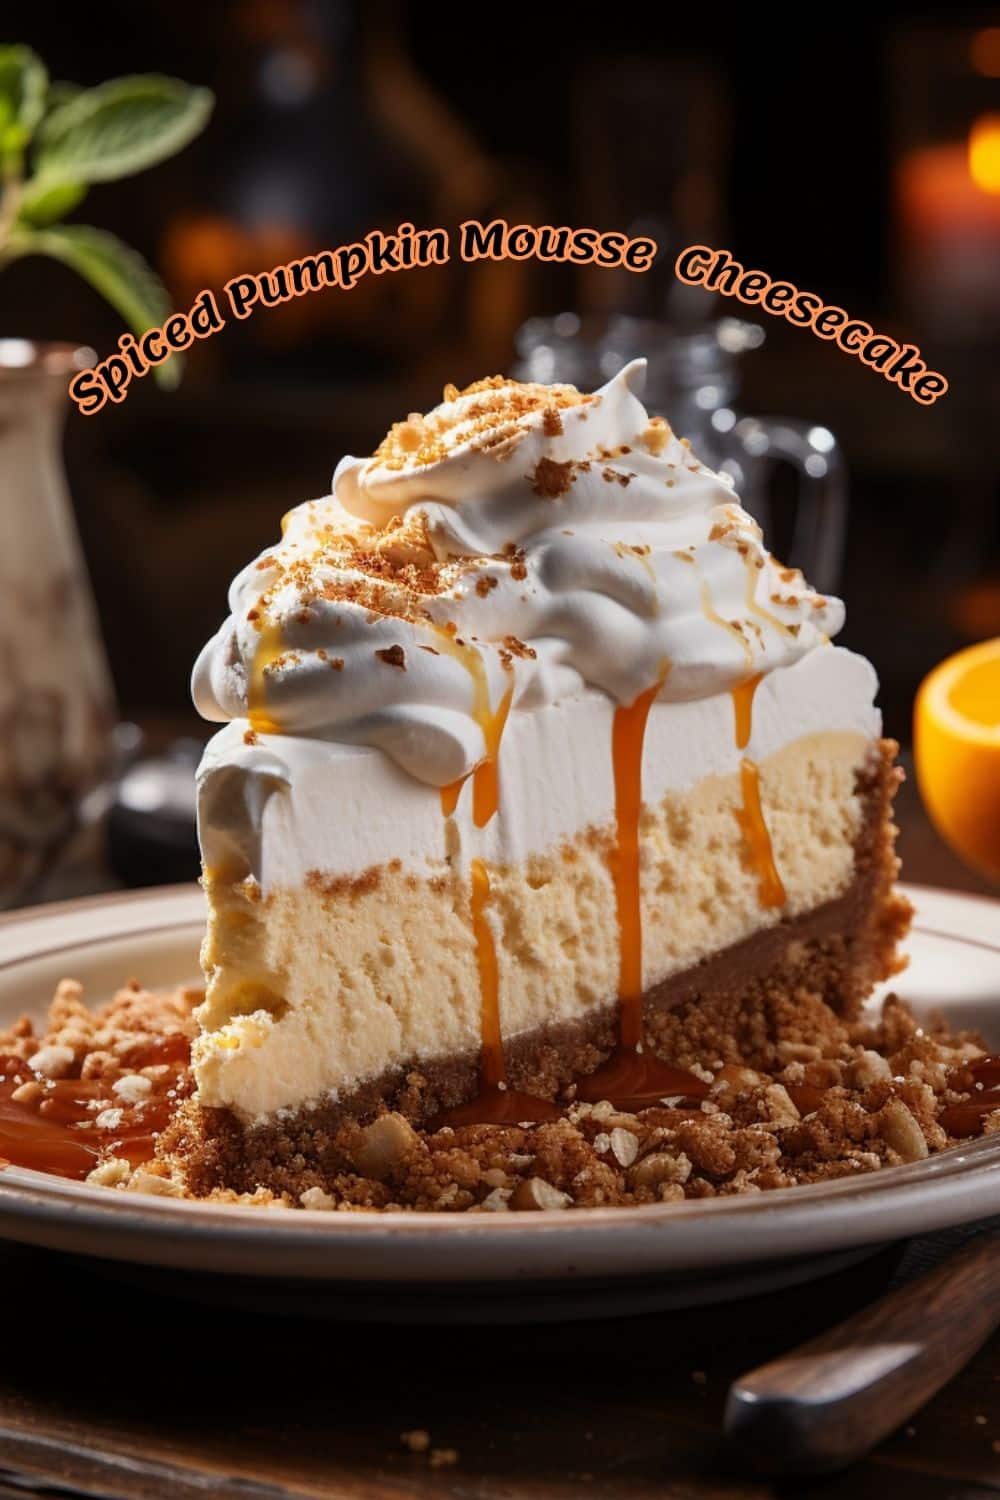 Spiced Pumpkin Mousse Cheesecake topped with maple whipped topping